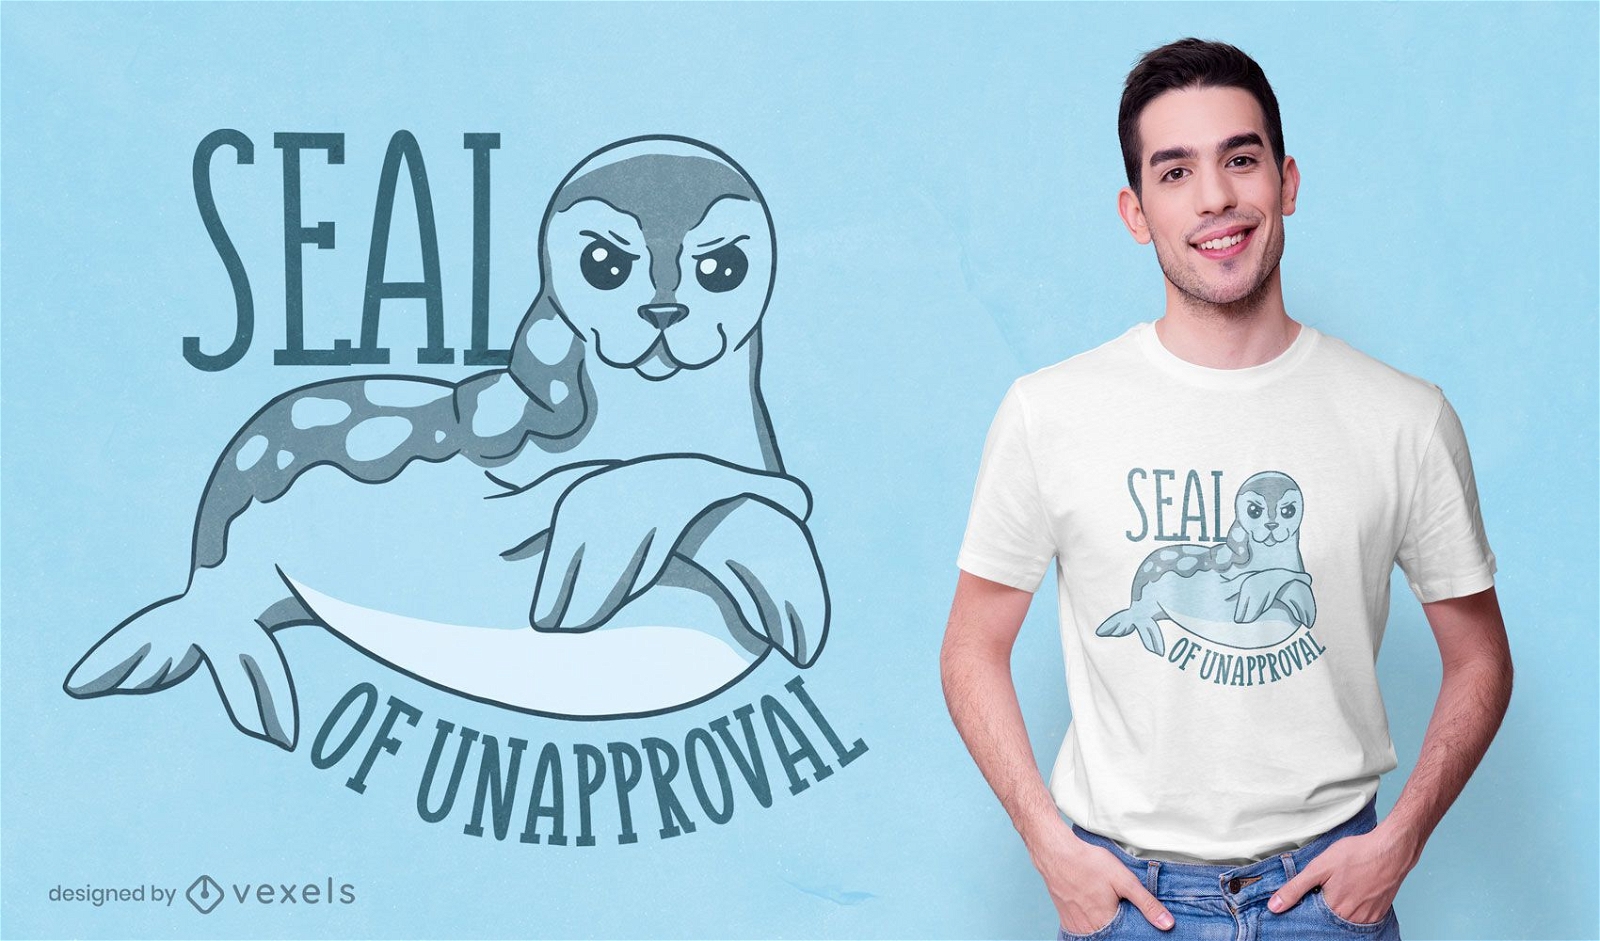 Seal of unapproval t-shirt design